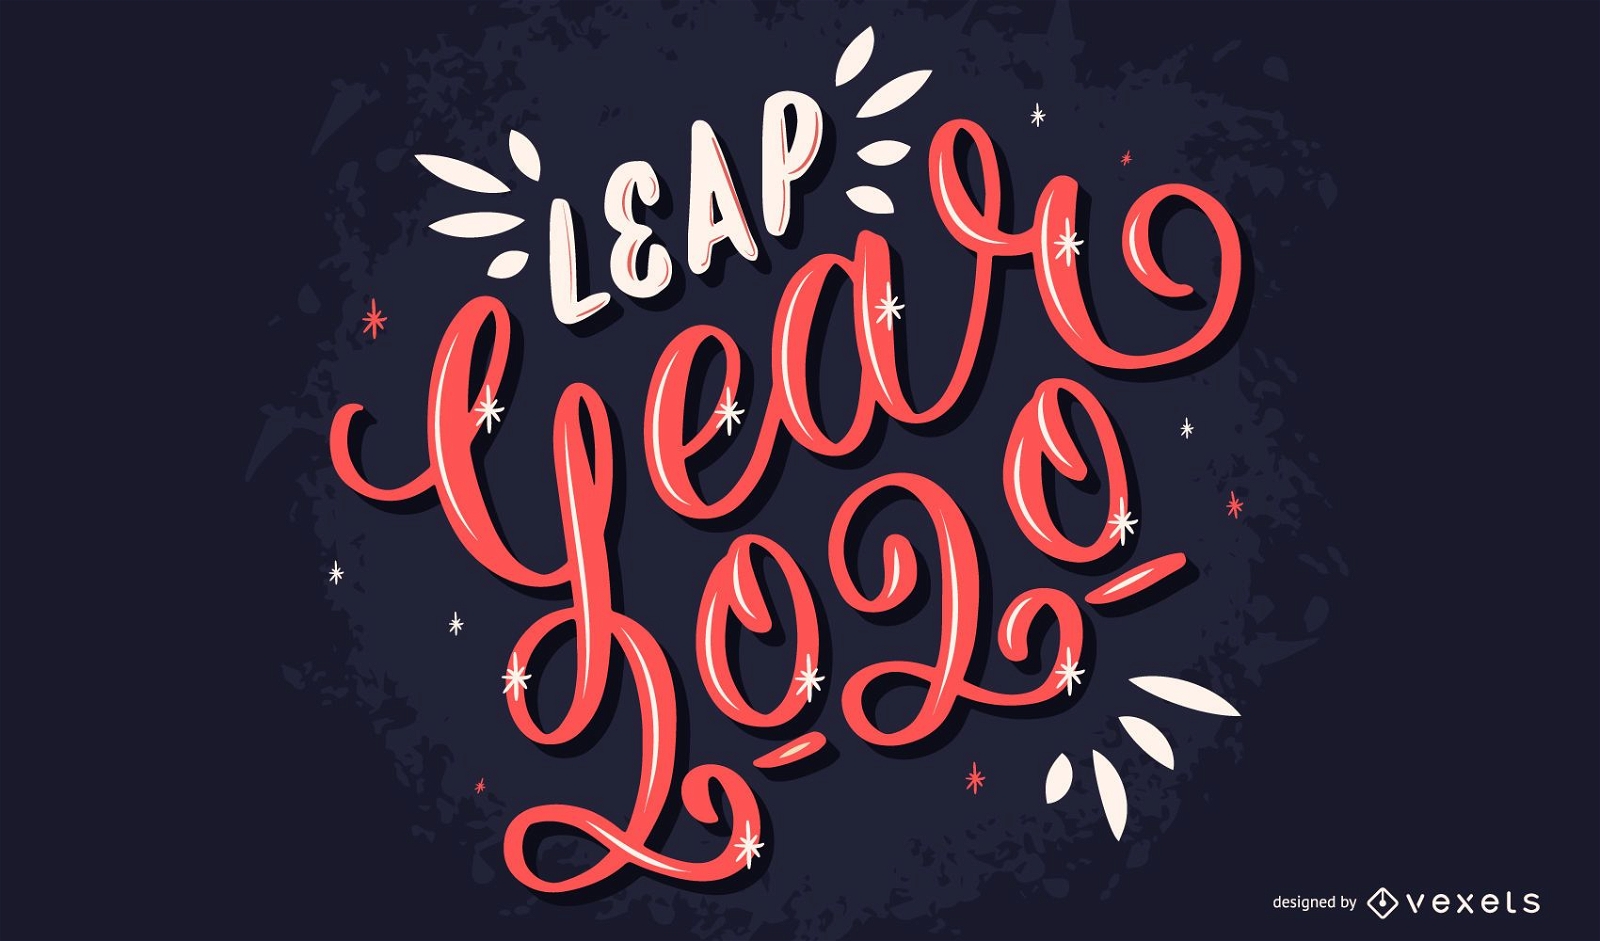 Leap year 2020 lettering design